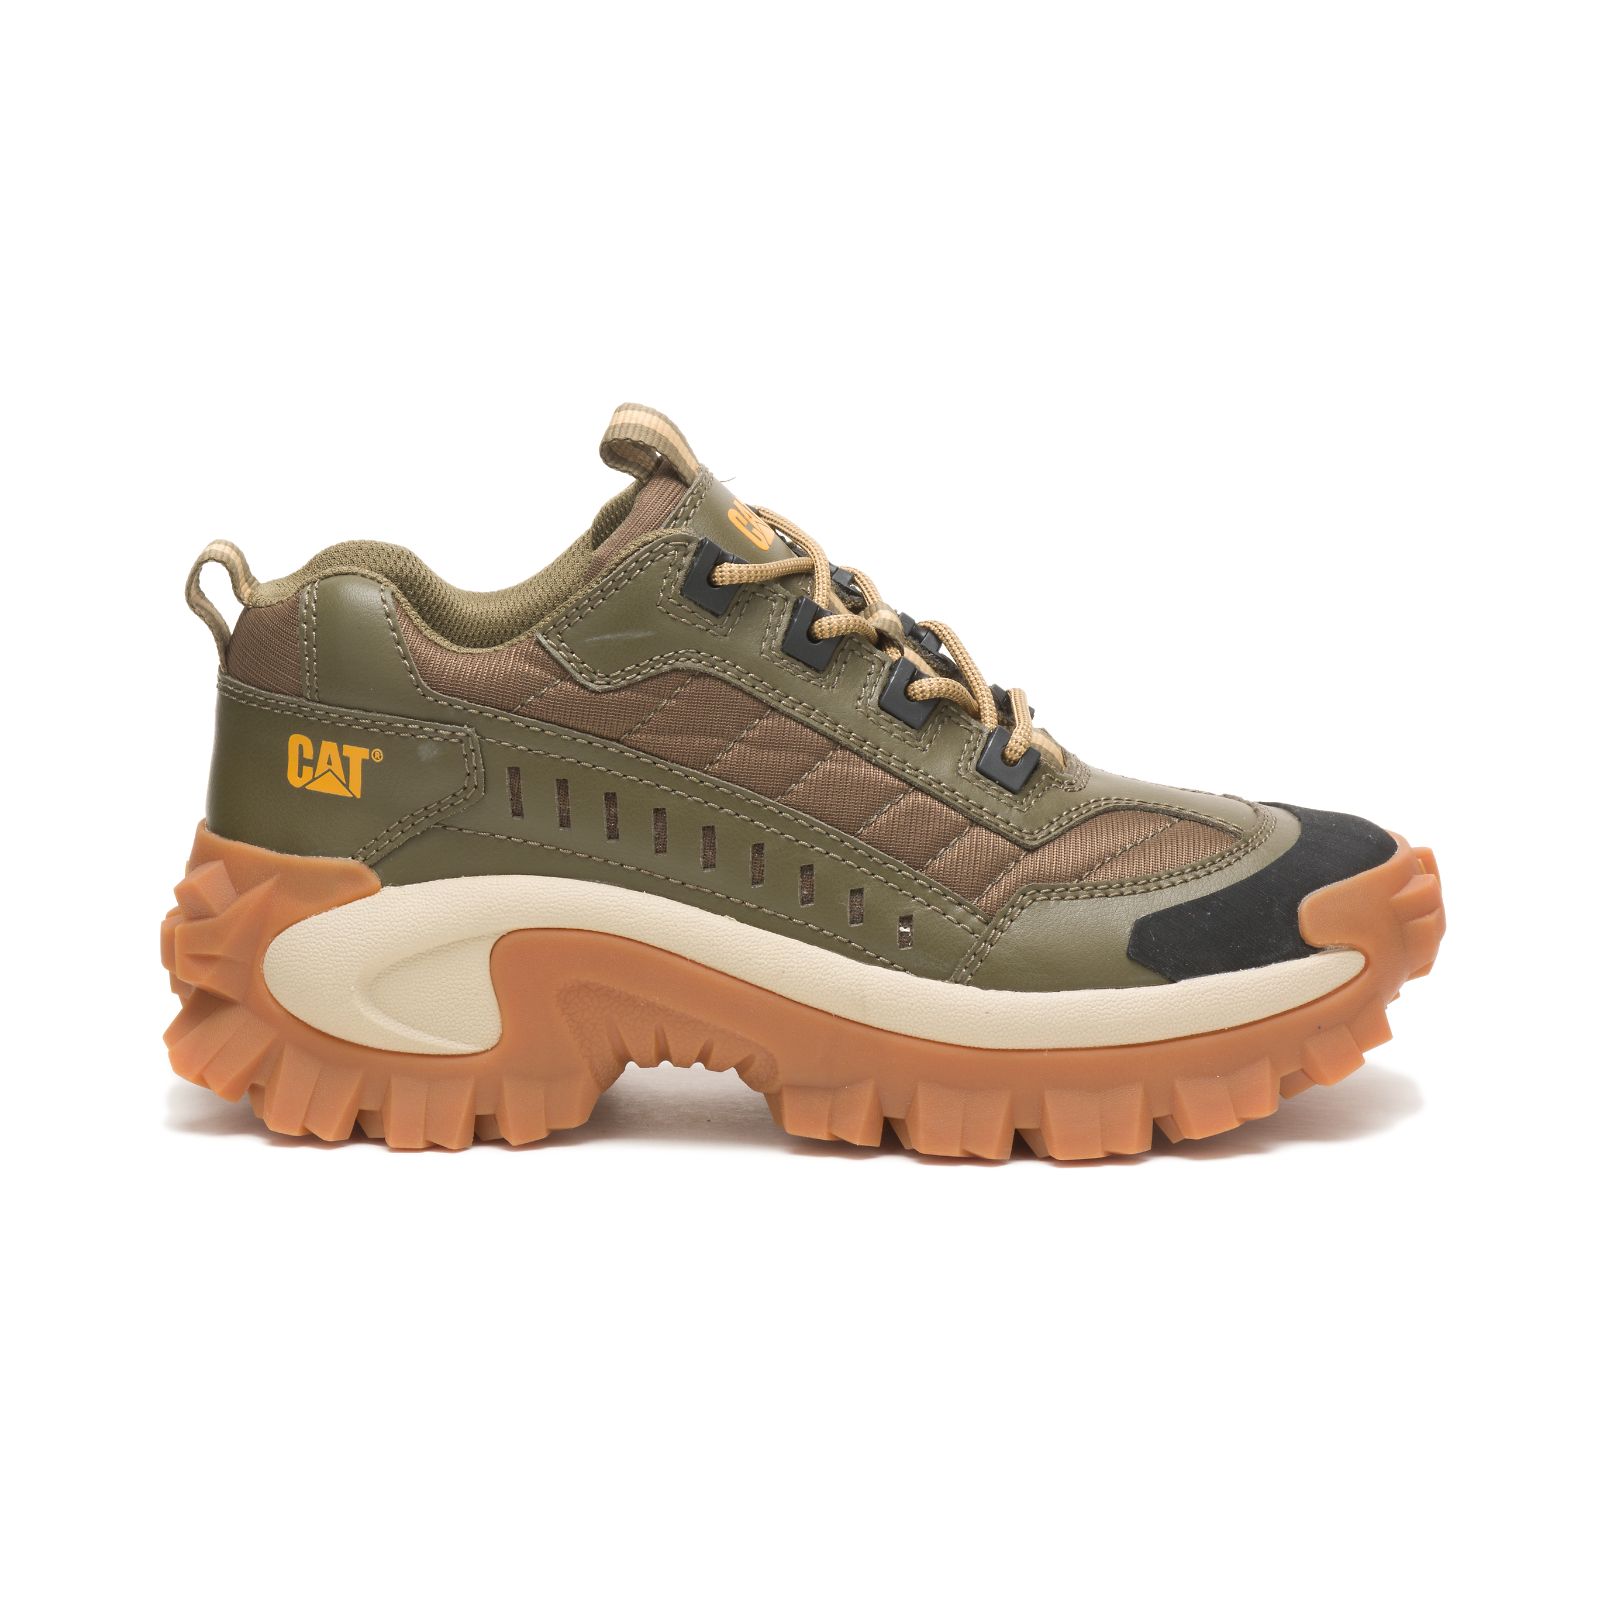 Caterpillar Shoes Lahore - Caterpillar Intruder Womens Casual Shoes Dark Olive (940185-XGL)